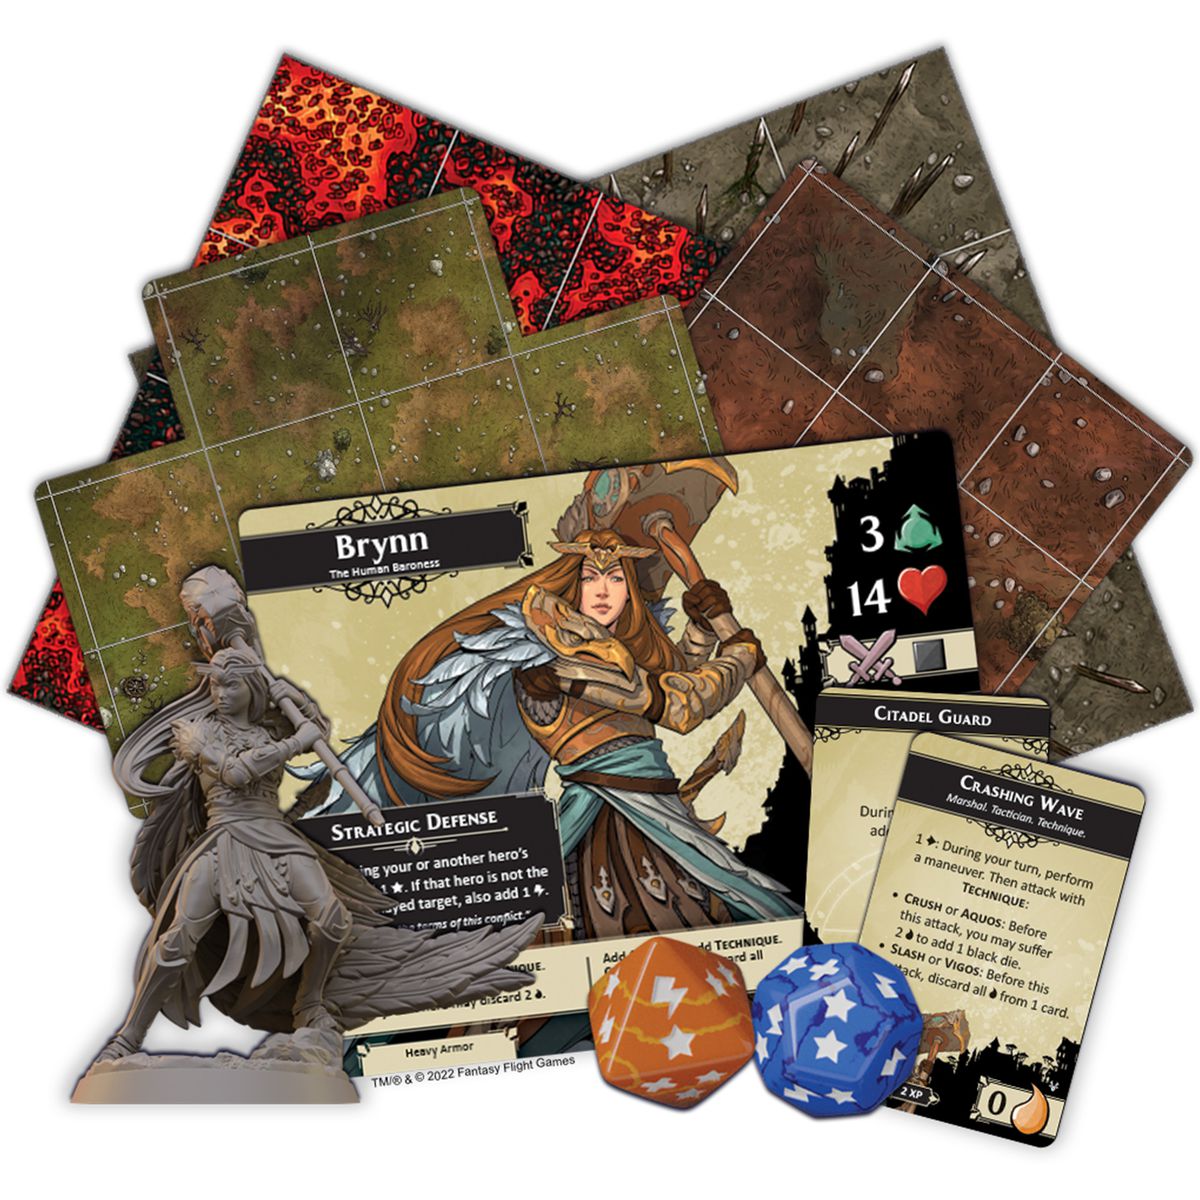 Tiles and a player card, plus a few custom dice, for Descent Act 2: The Betrayer’s War. 